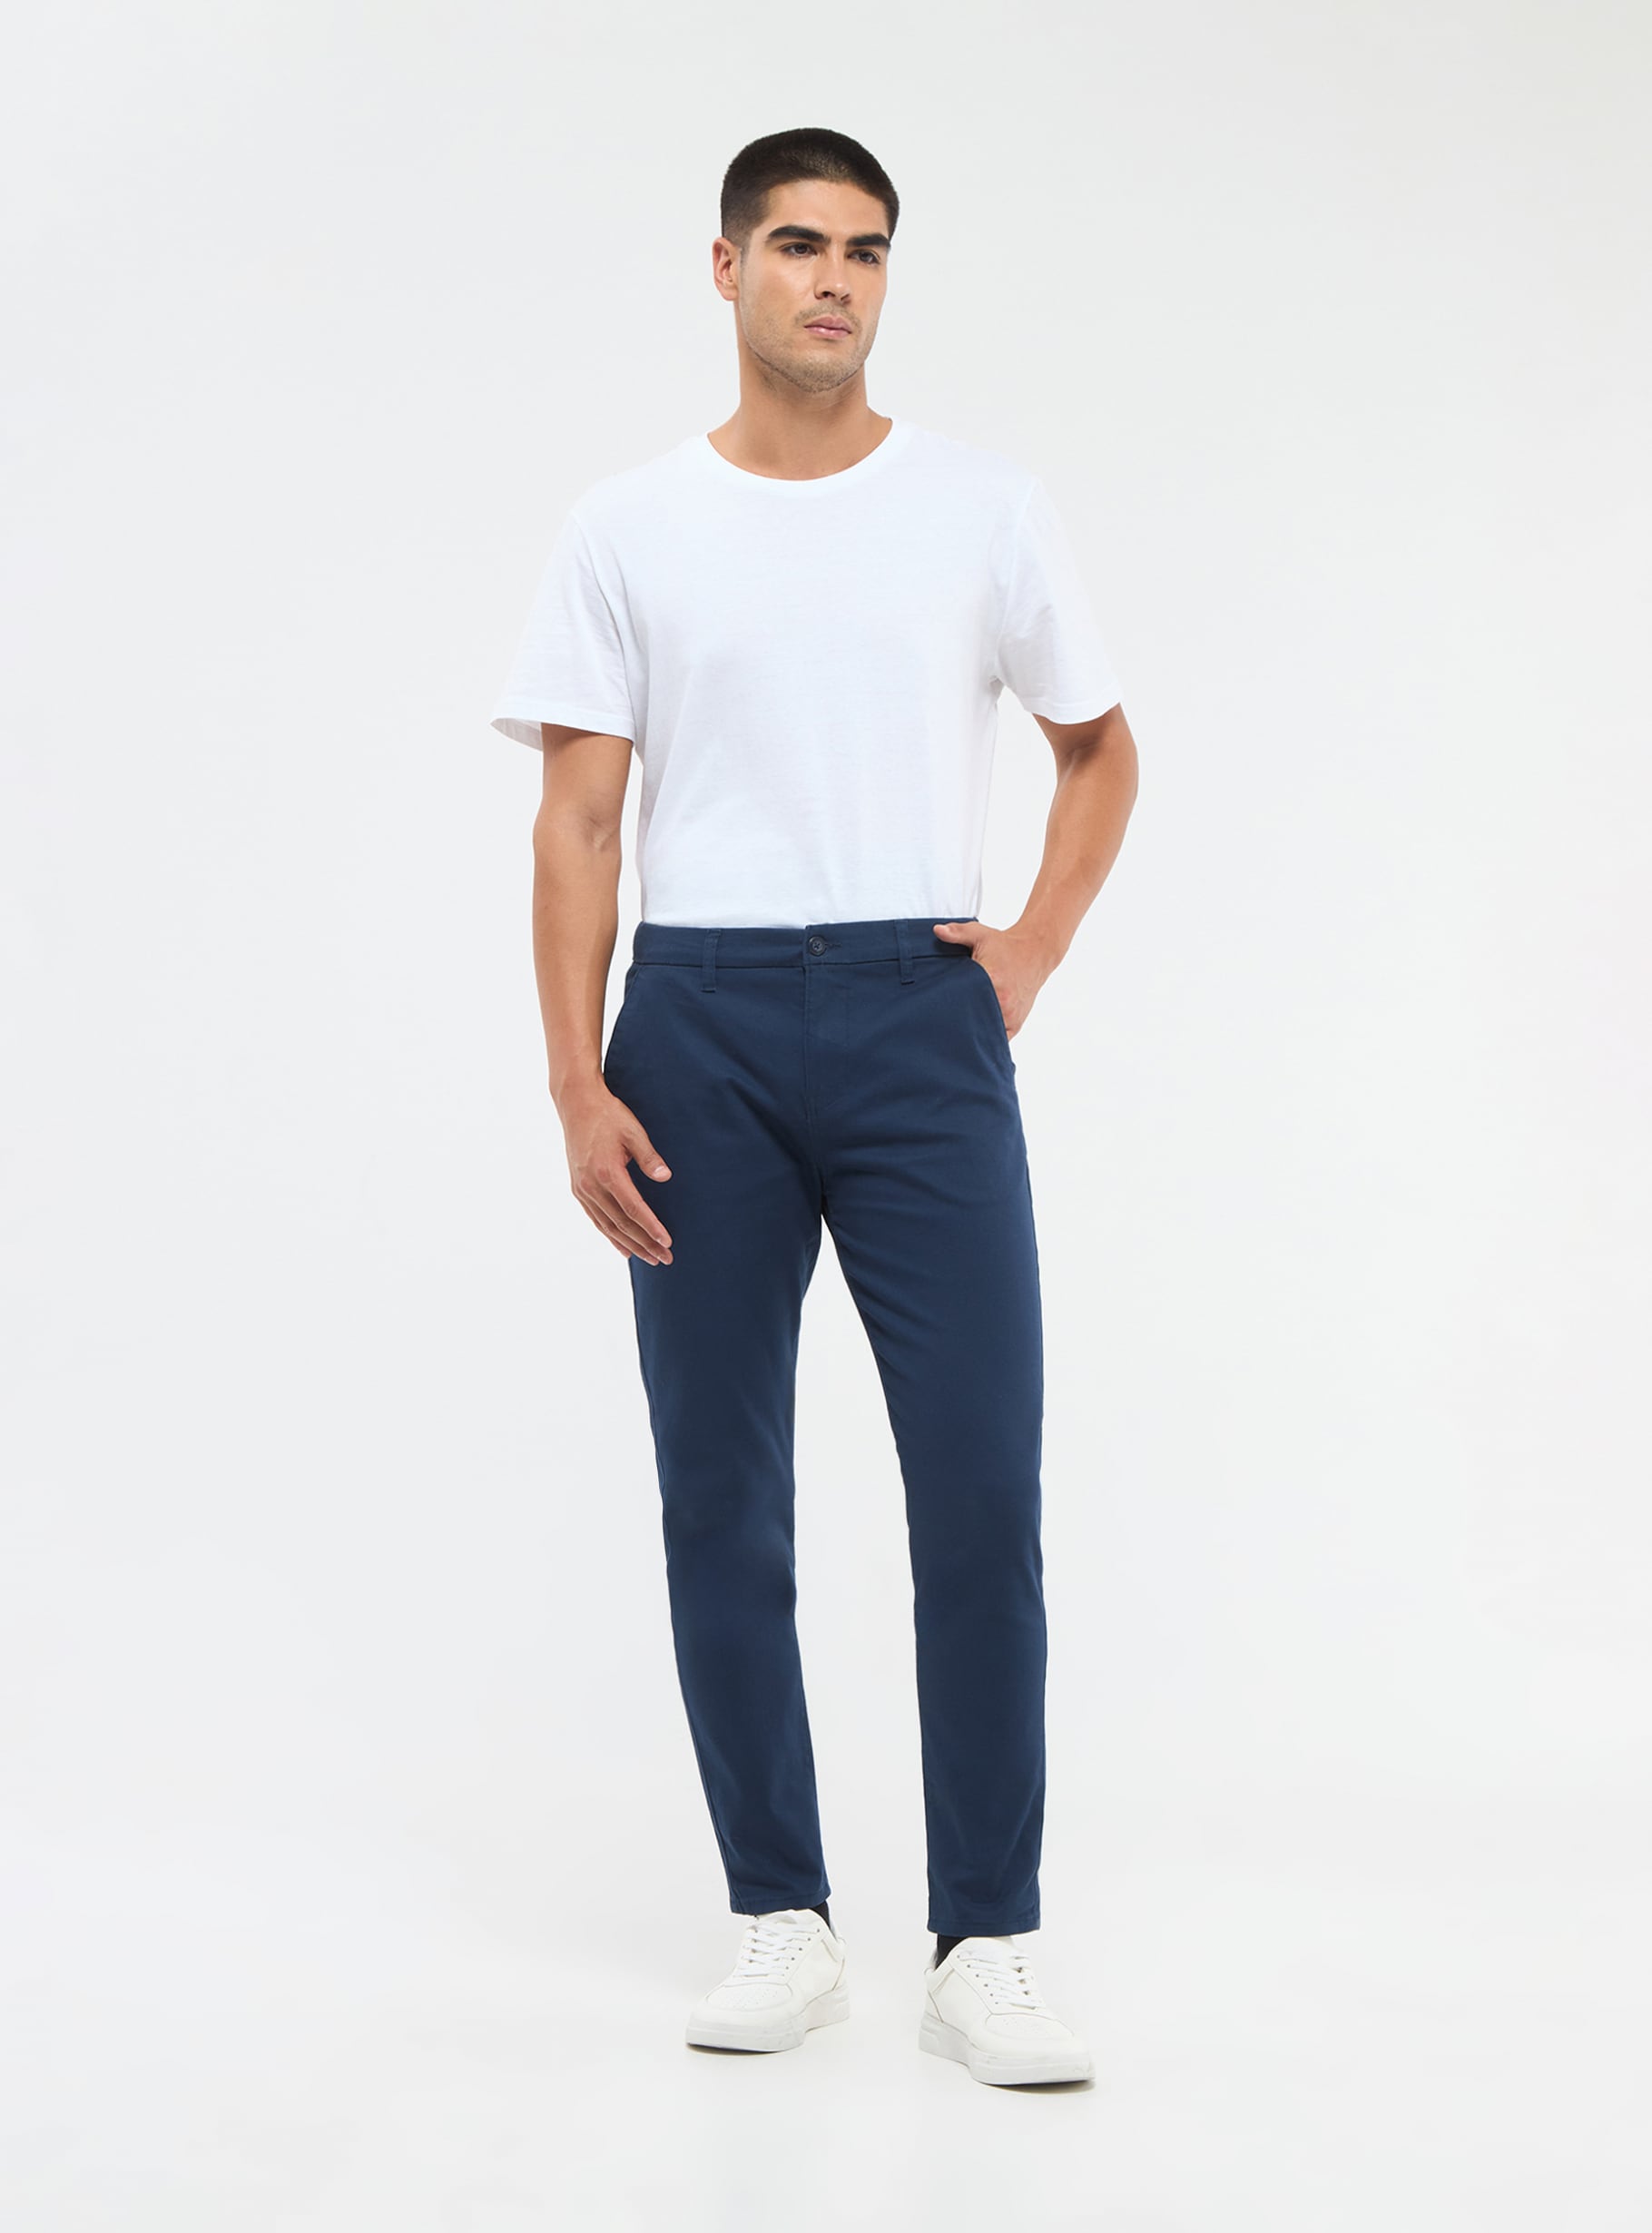 Breathtaking Navy Blue Colored Casual Wear Cotton Pant